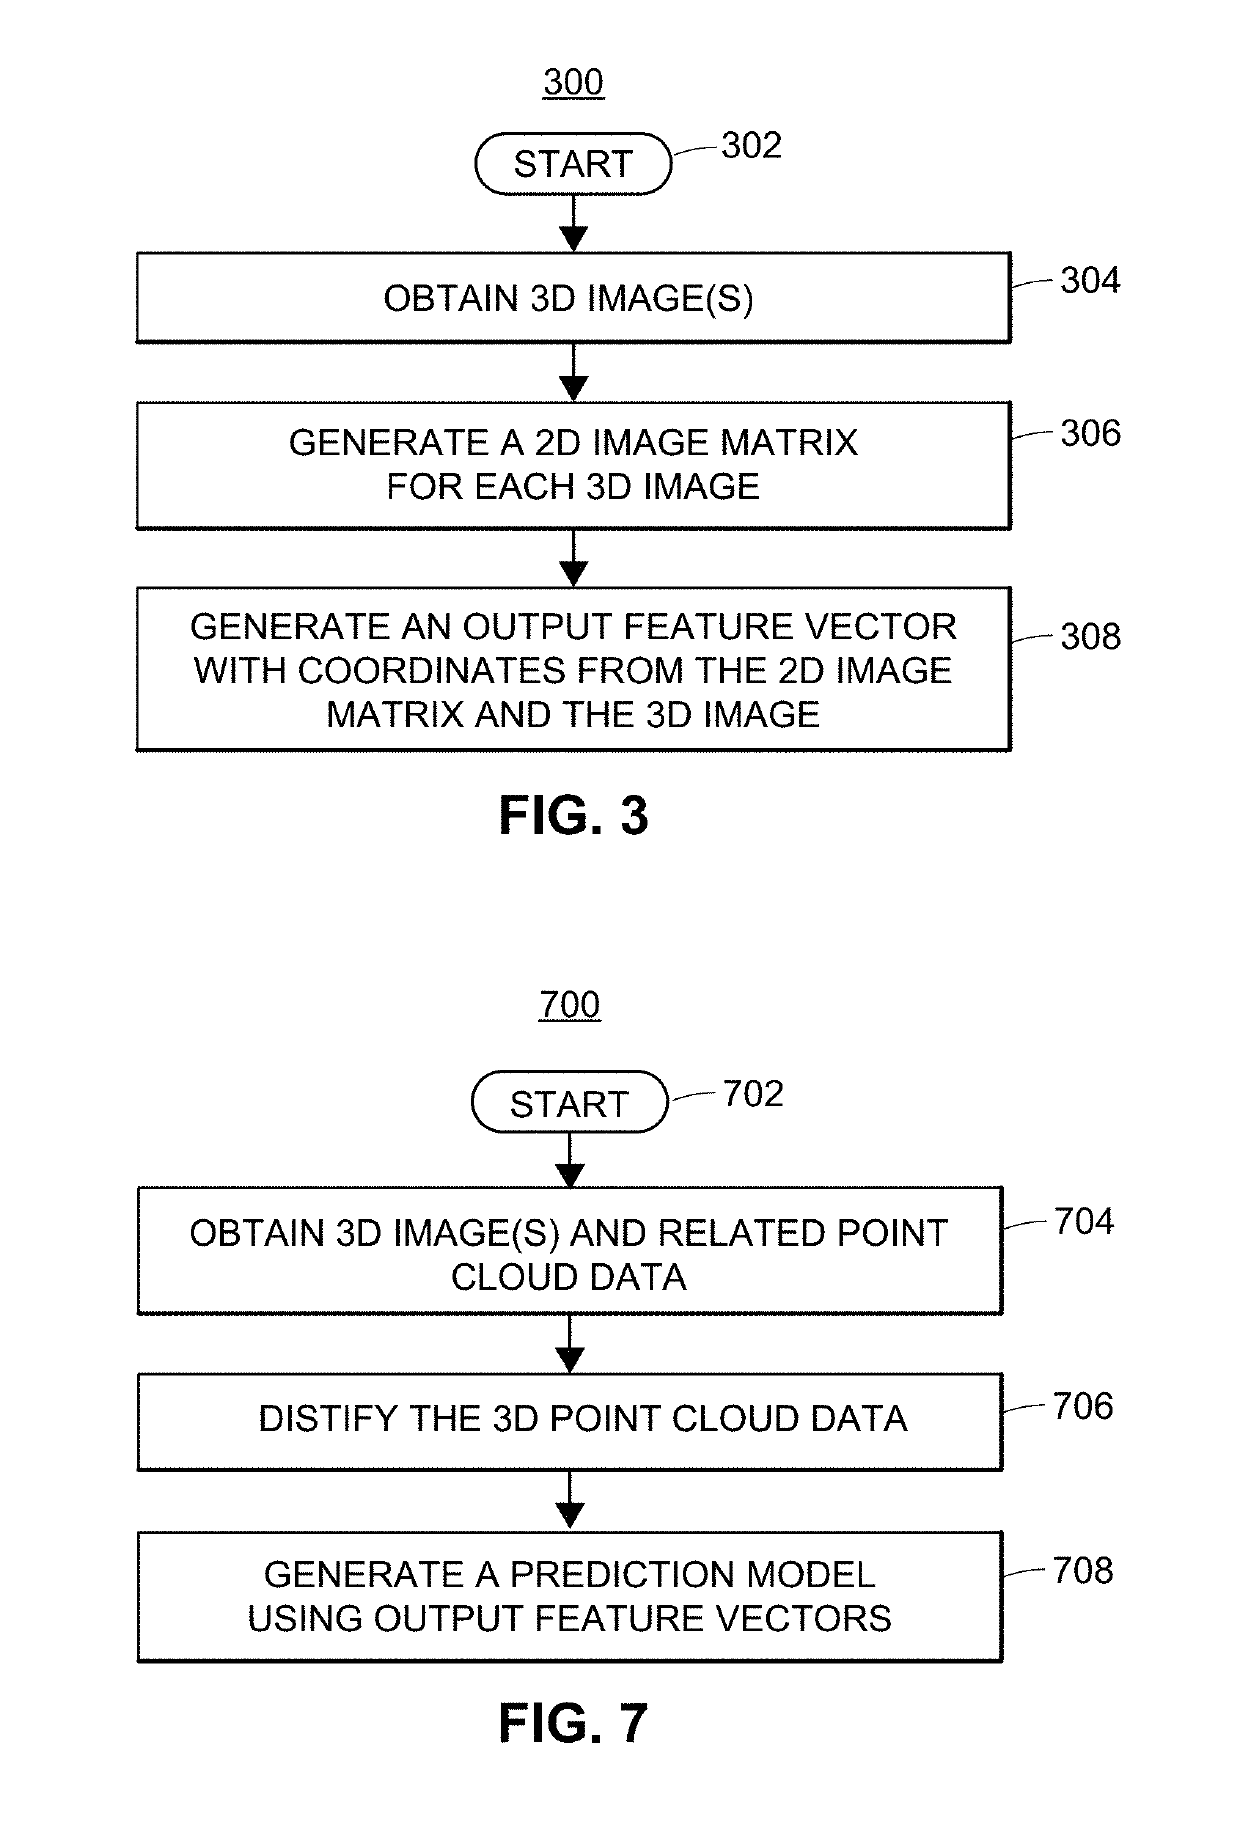 Systems and methods regarding 2D image and 3D image ensemble prediction models